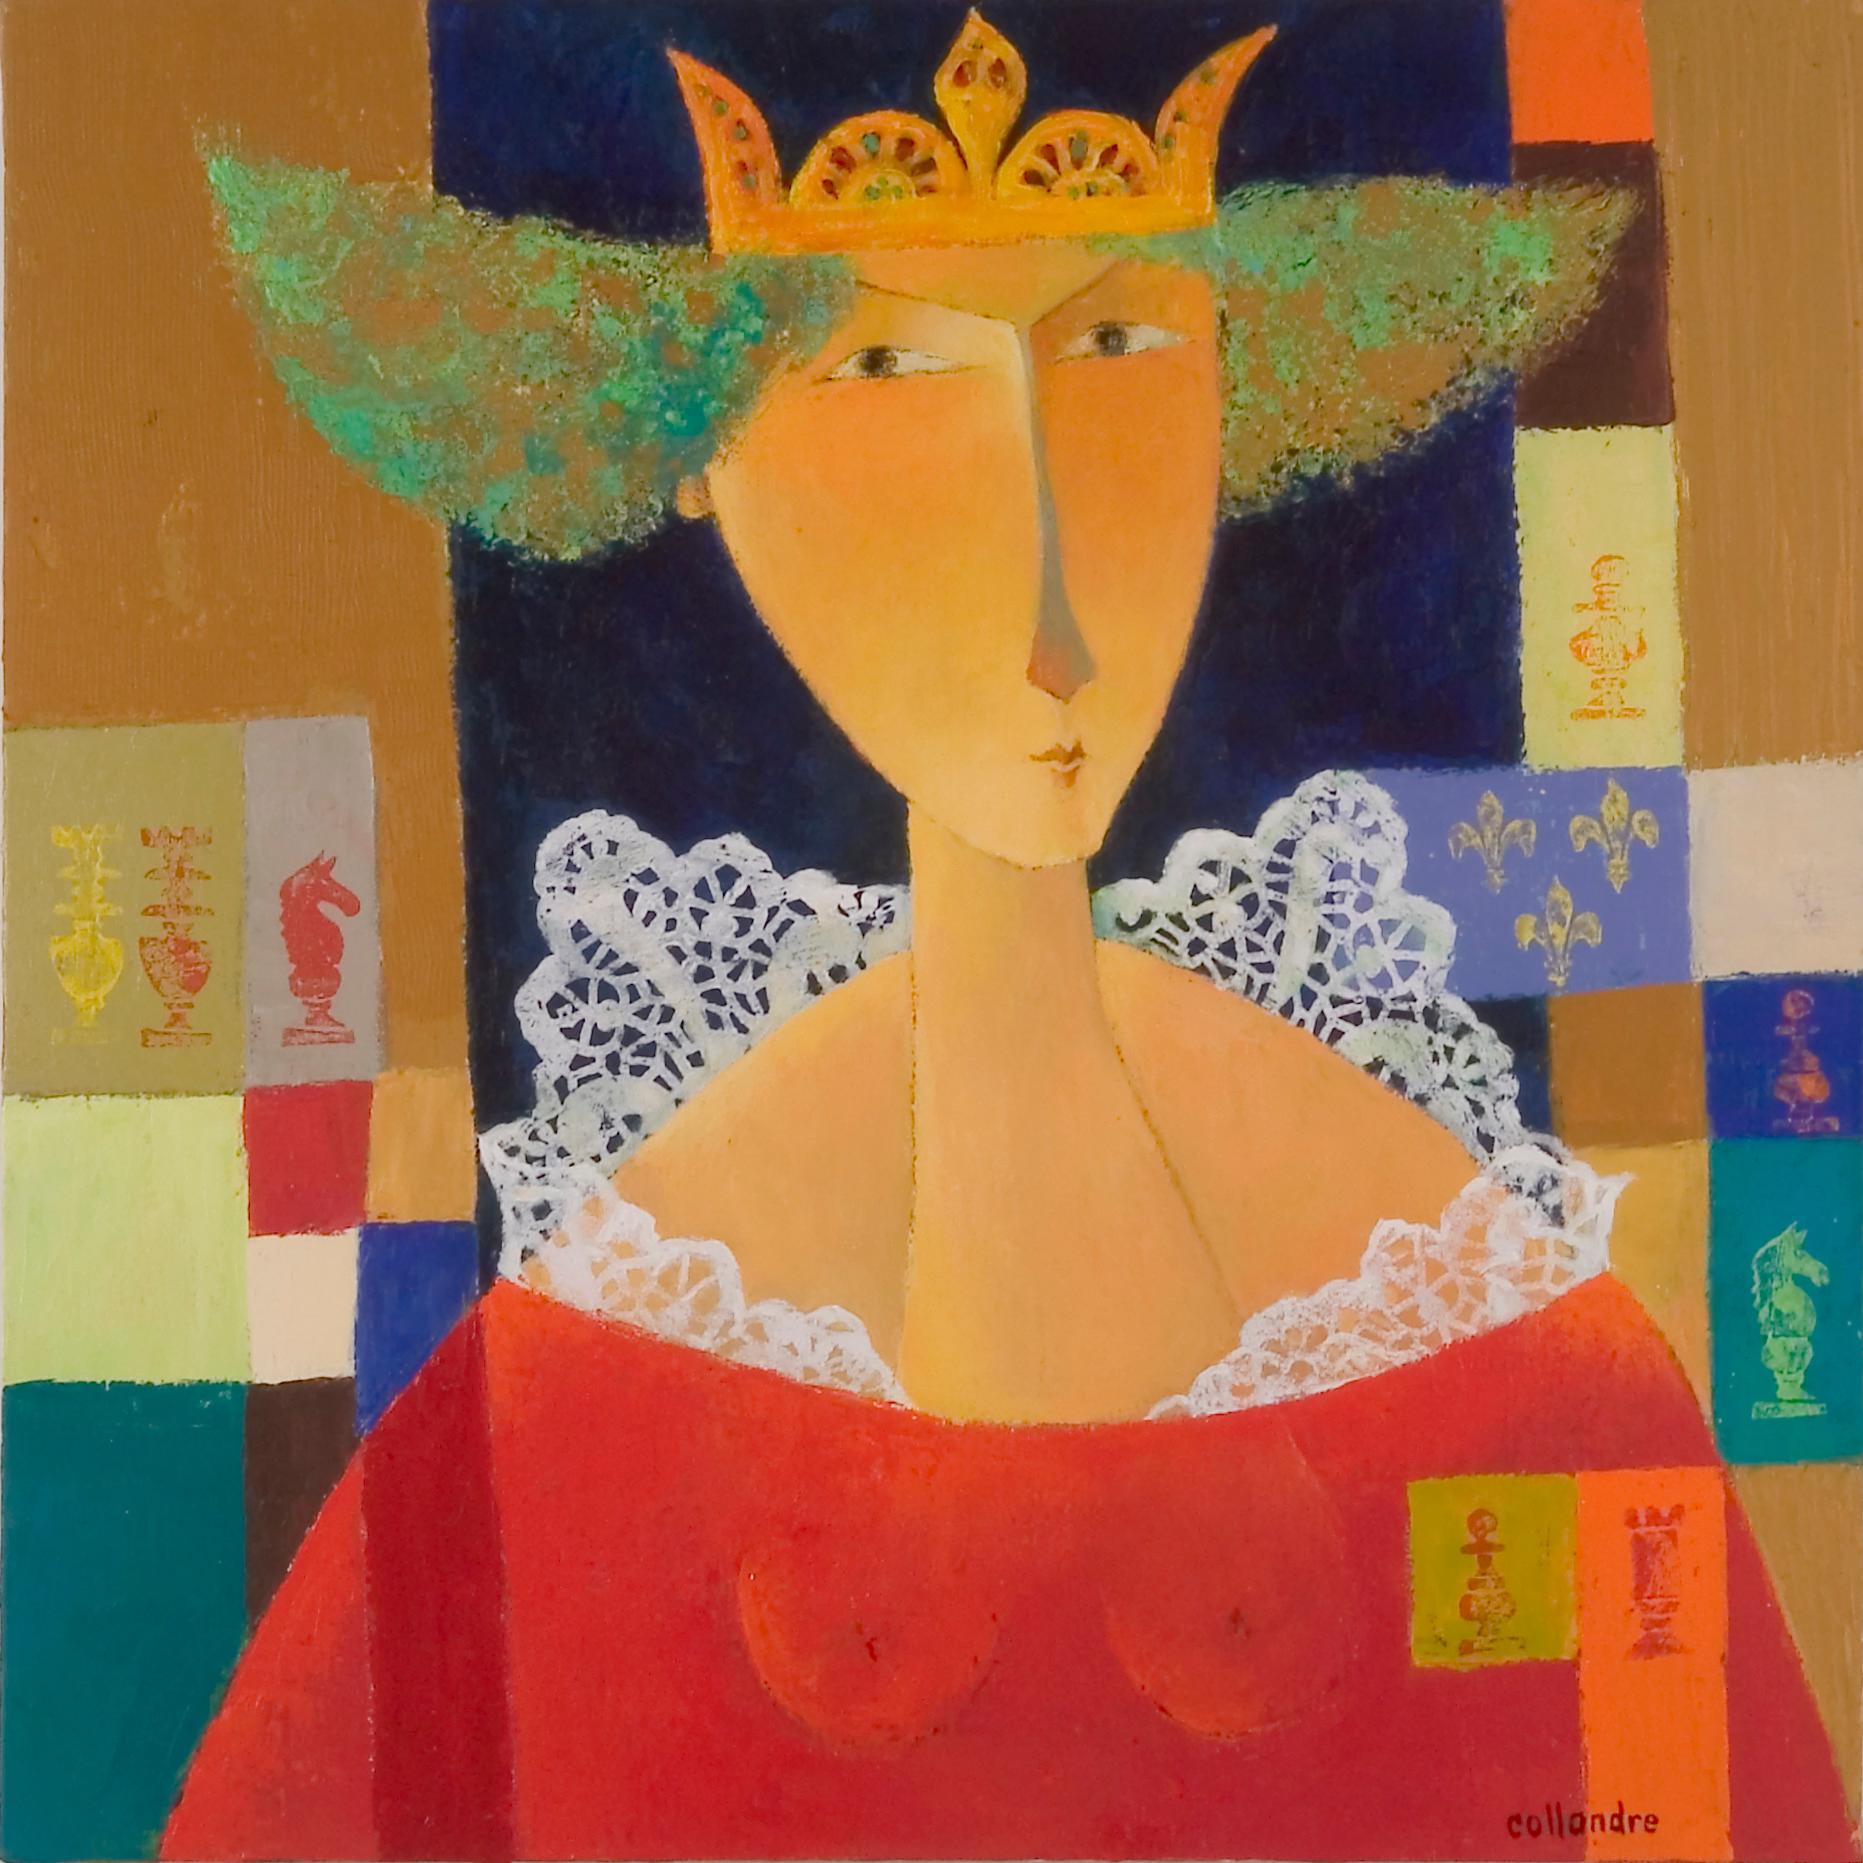 Françoise Collandre Portrait Painting - "Chess — The Queen", Crowned Woman in Red with Ruff, Figurative Acrylic Painting